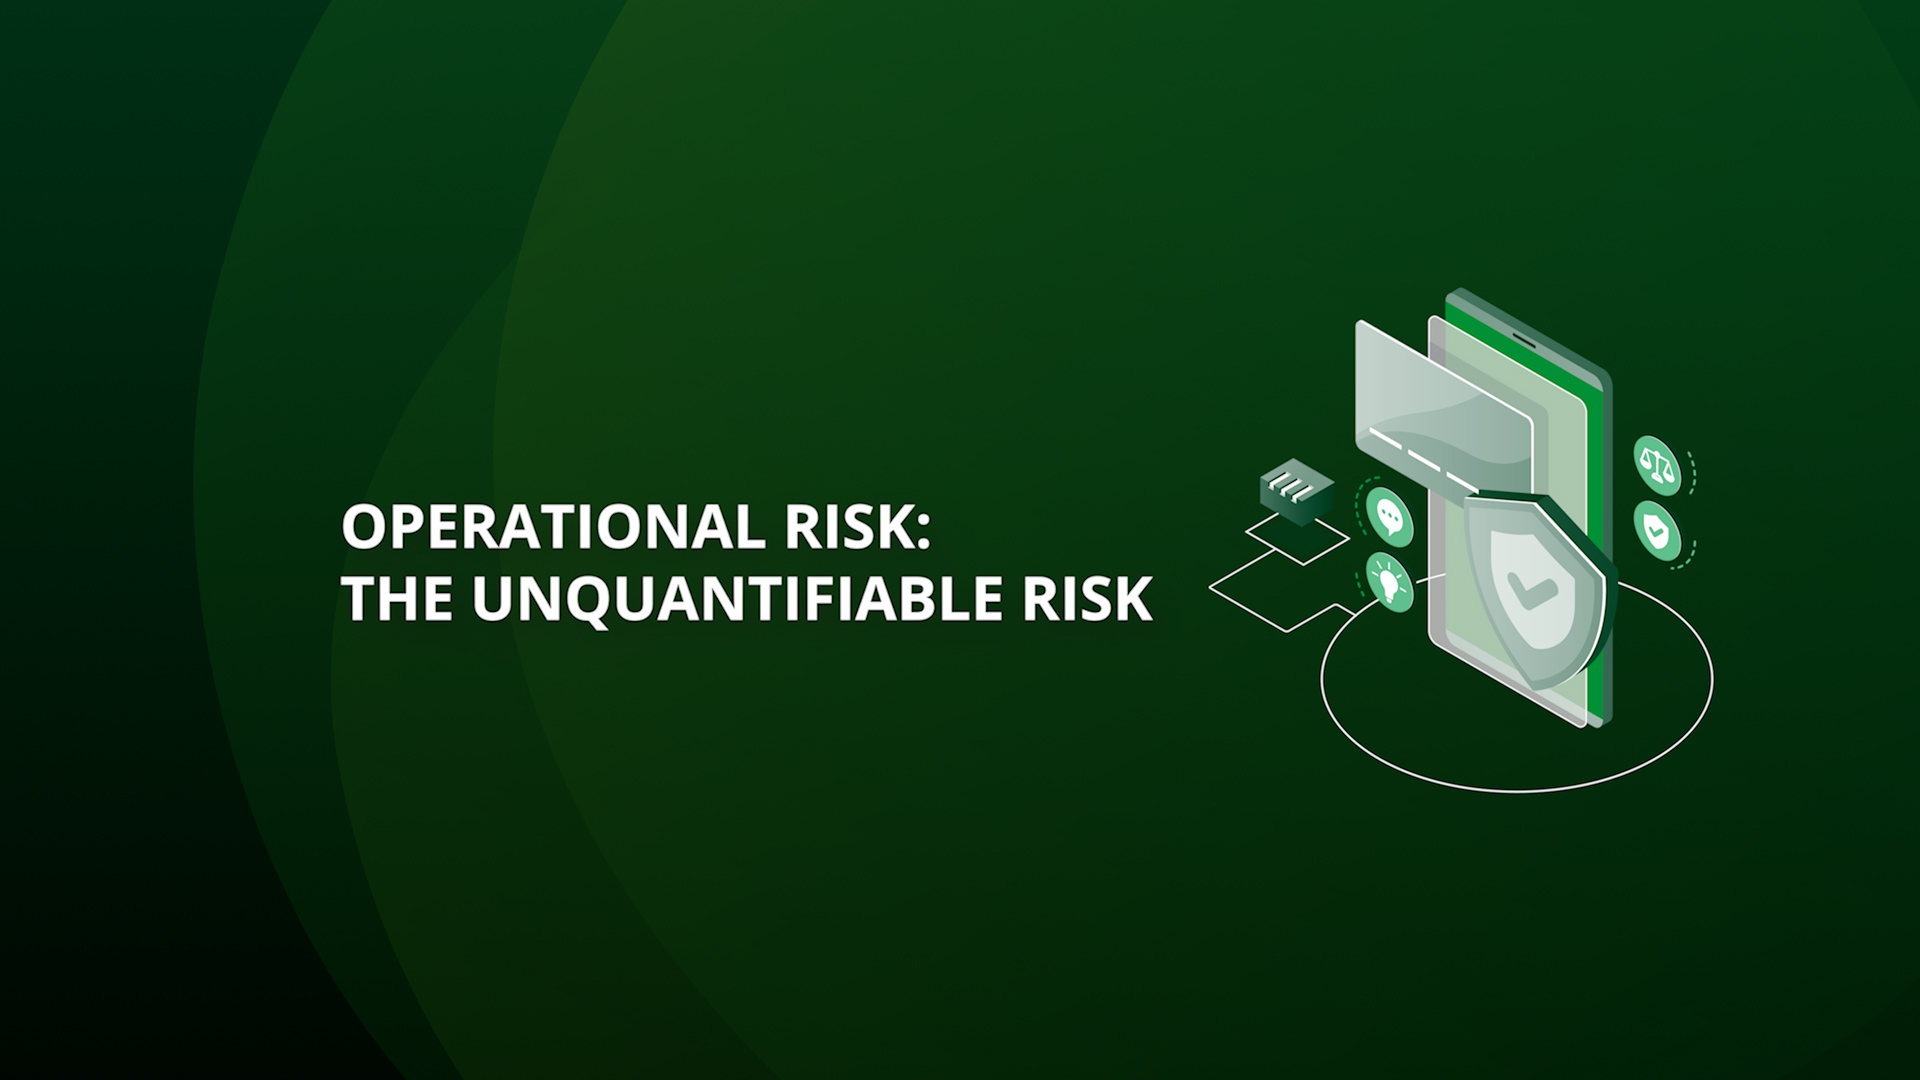 Operational Risk: The Unquantifiable Risk